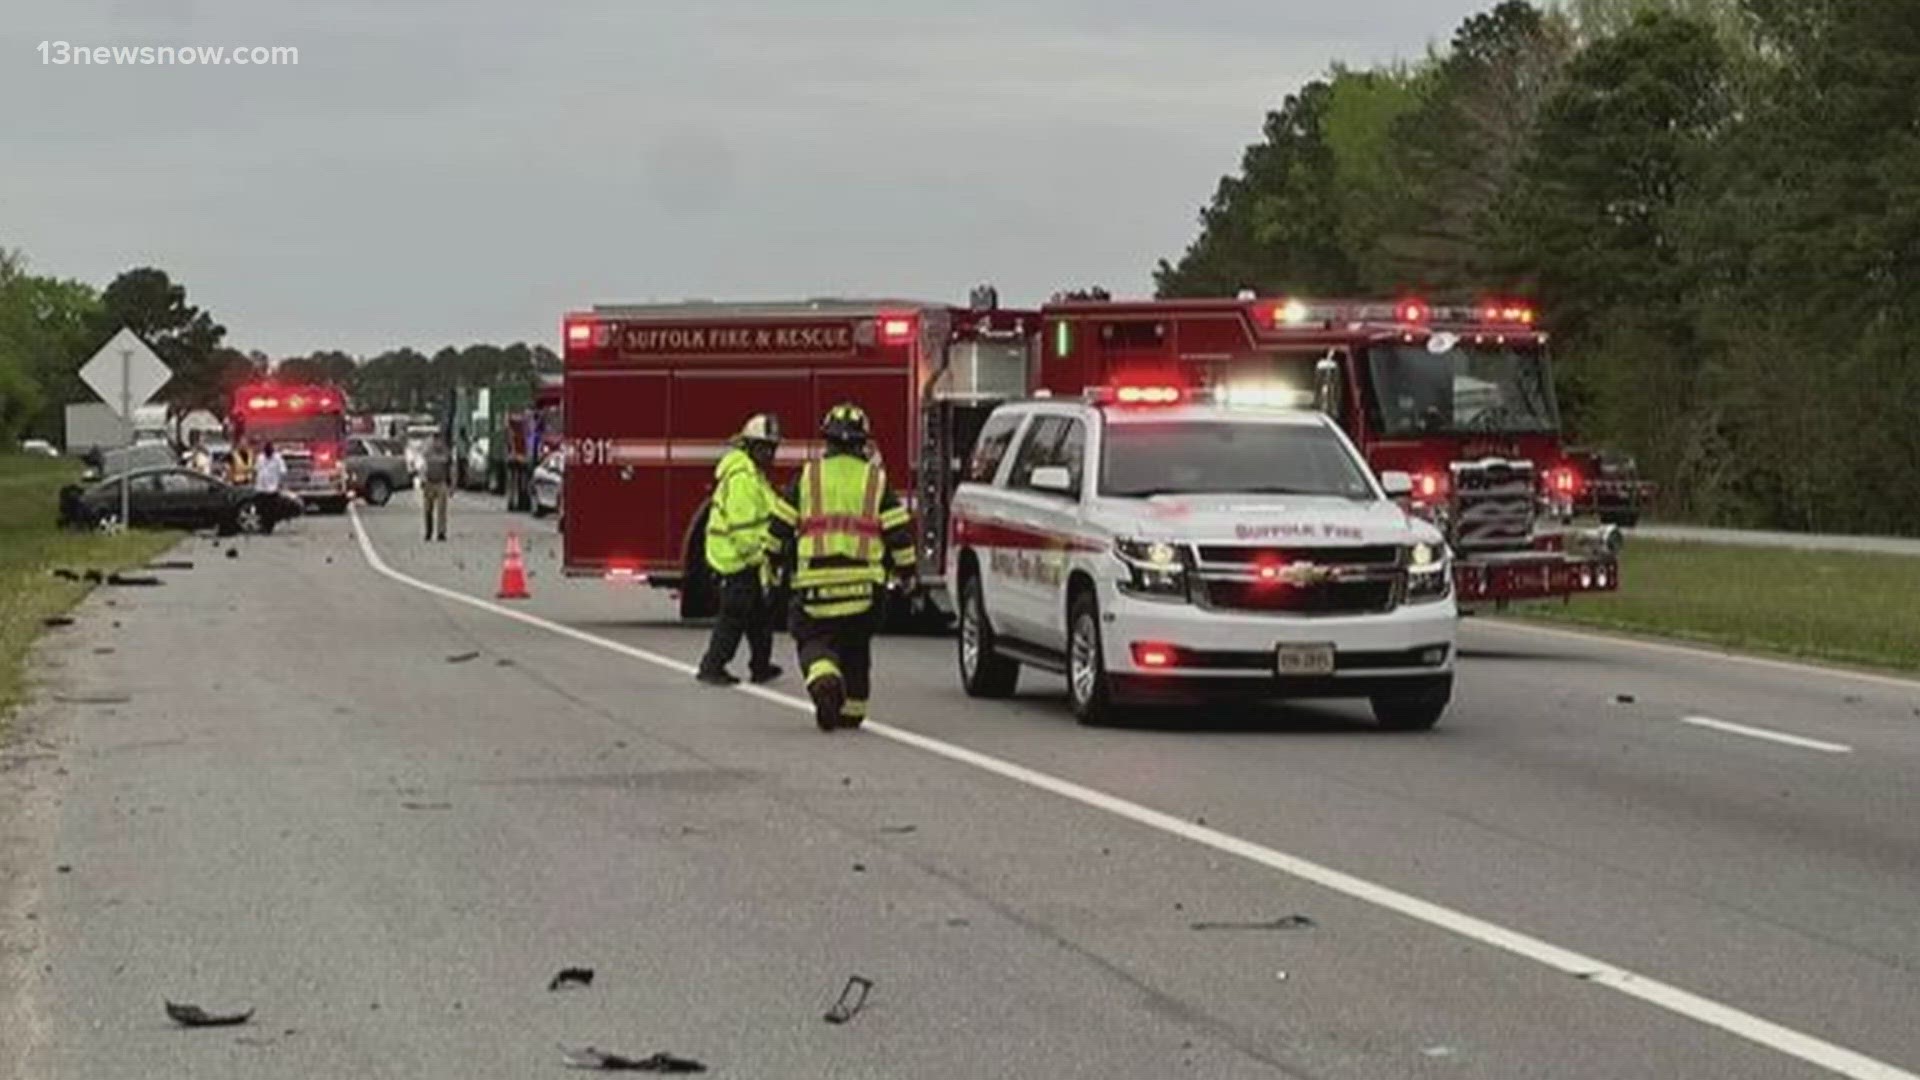 The crash happened on Highway 58 near the exit for Pitchkettle Road, according to Suffolk Fire-Rescue.